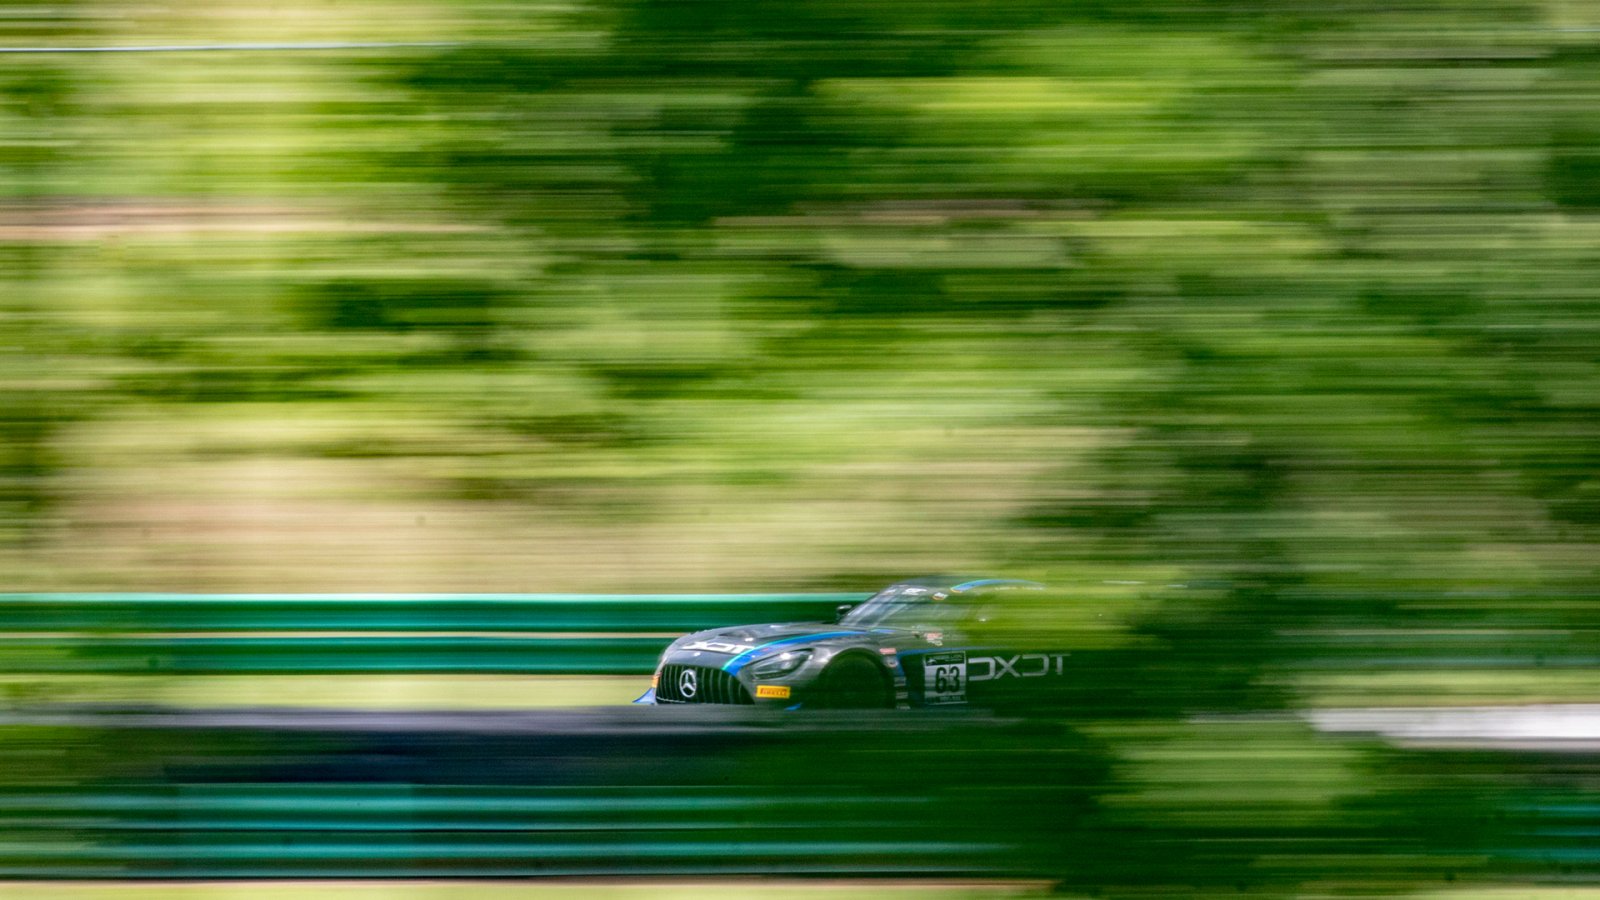 2021 Calendar Update Includes Earlier VIR Appearance, Final Planning Stages of CTMP Replacement